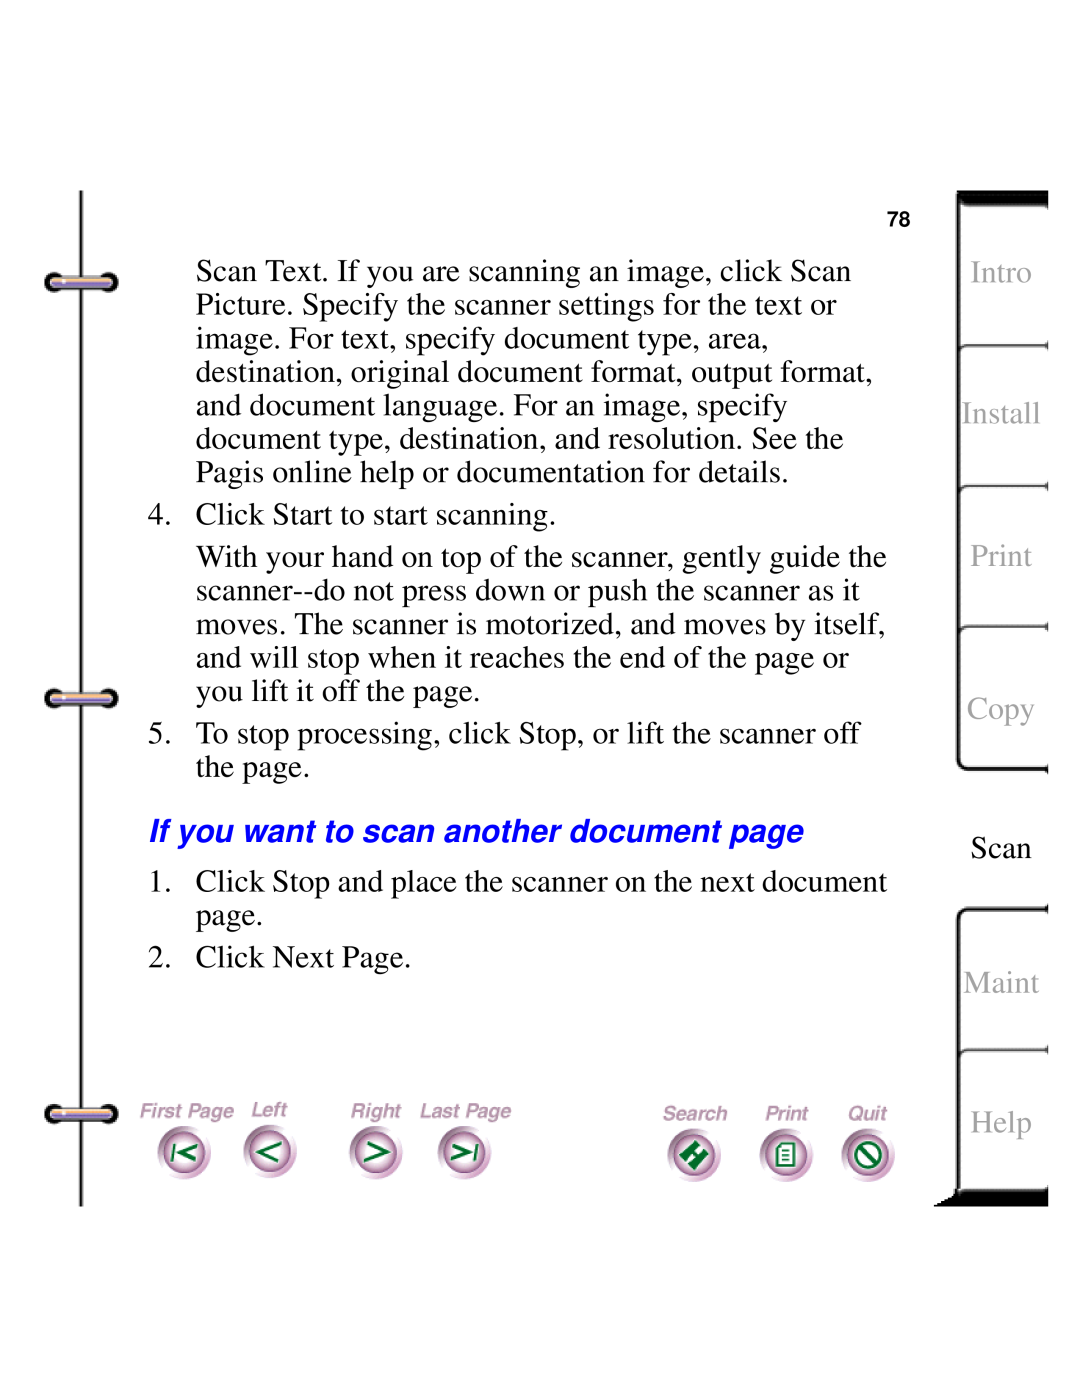 Xerox Document HomeCentre manual Click Start to start scanning, If you want to scan another document page, Maint, Help 